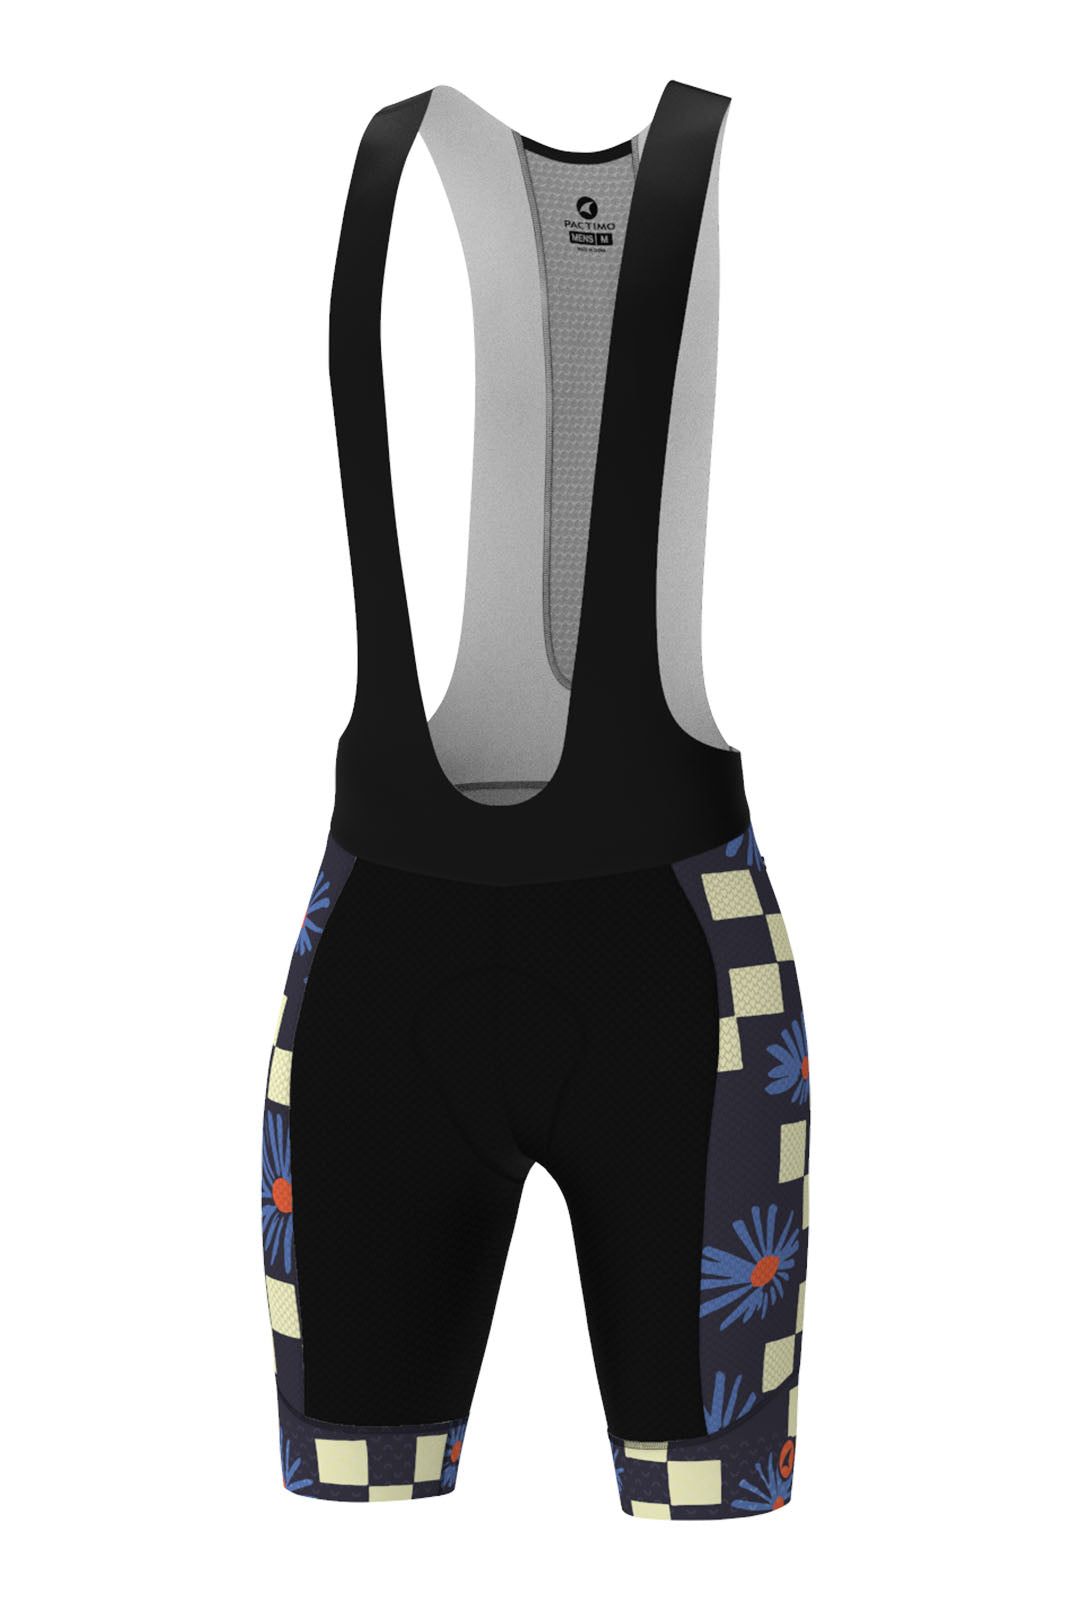 Men's Unique Cycling Bibs - Aster Check Navy Front View